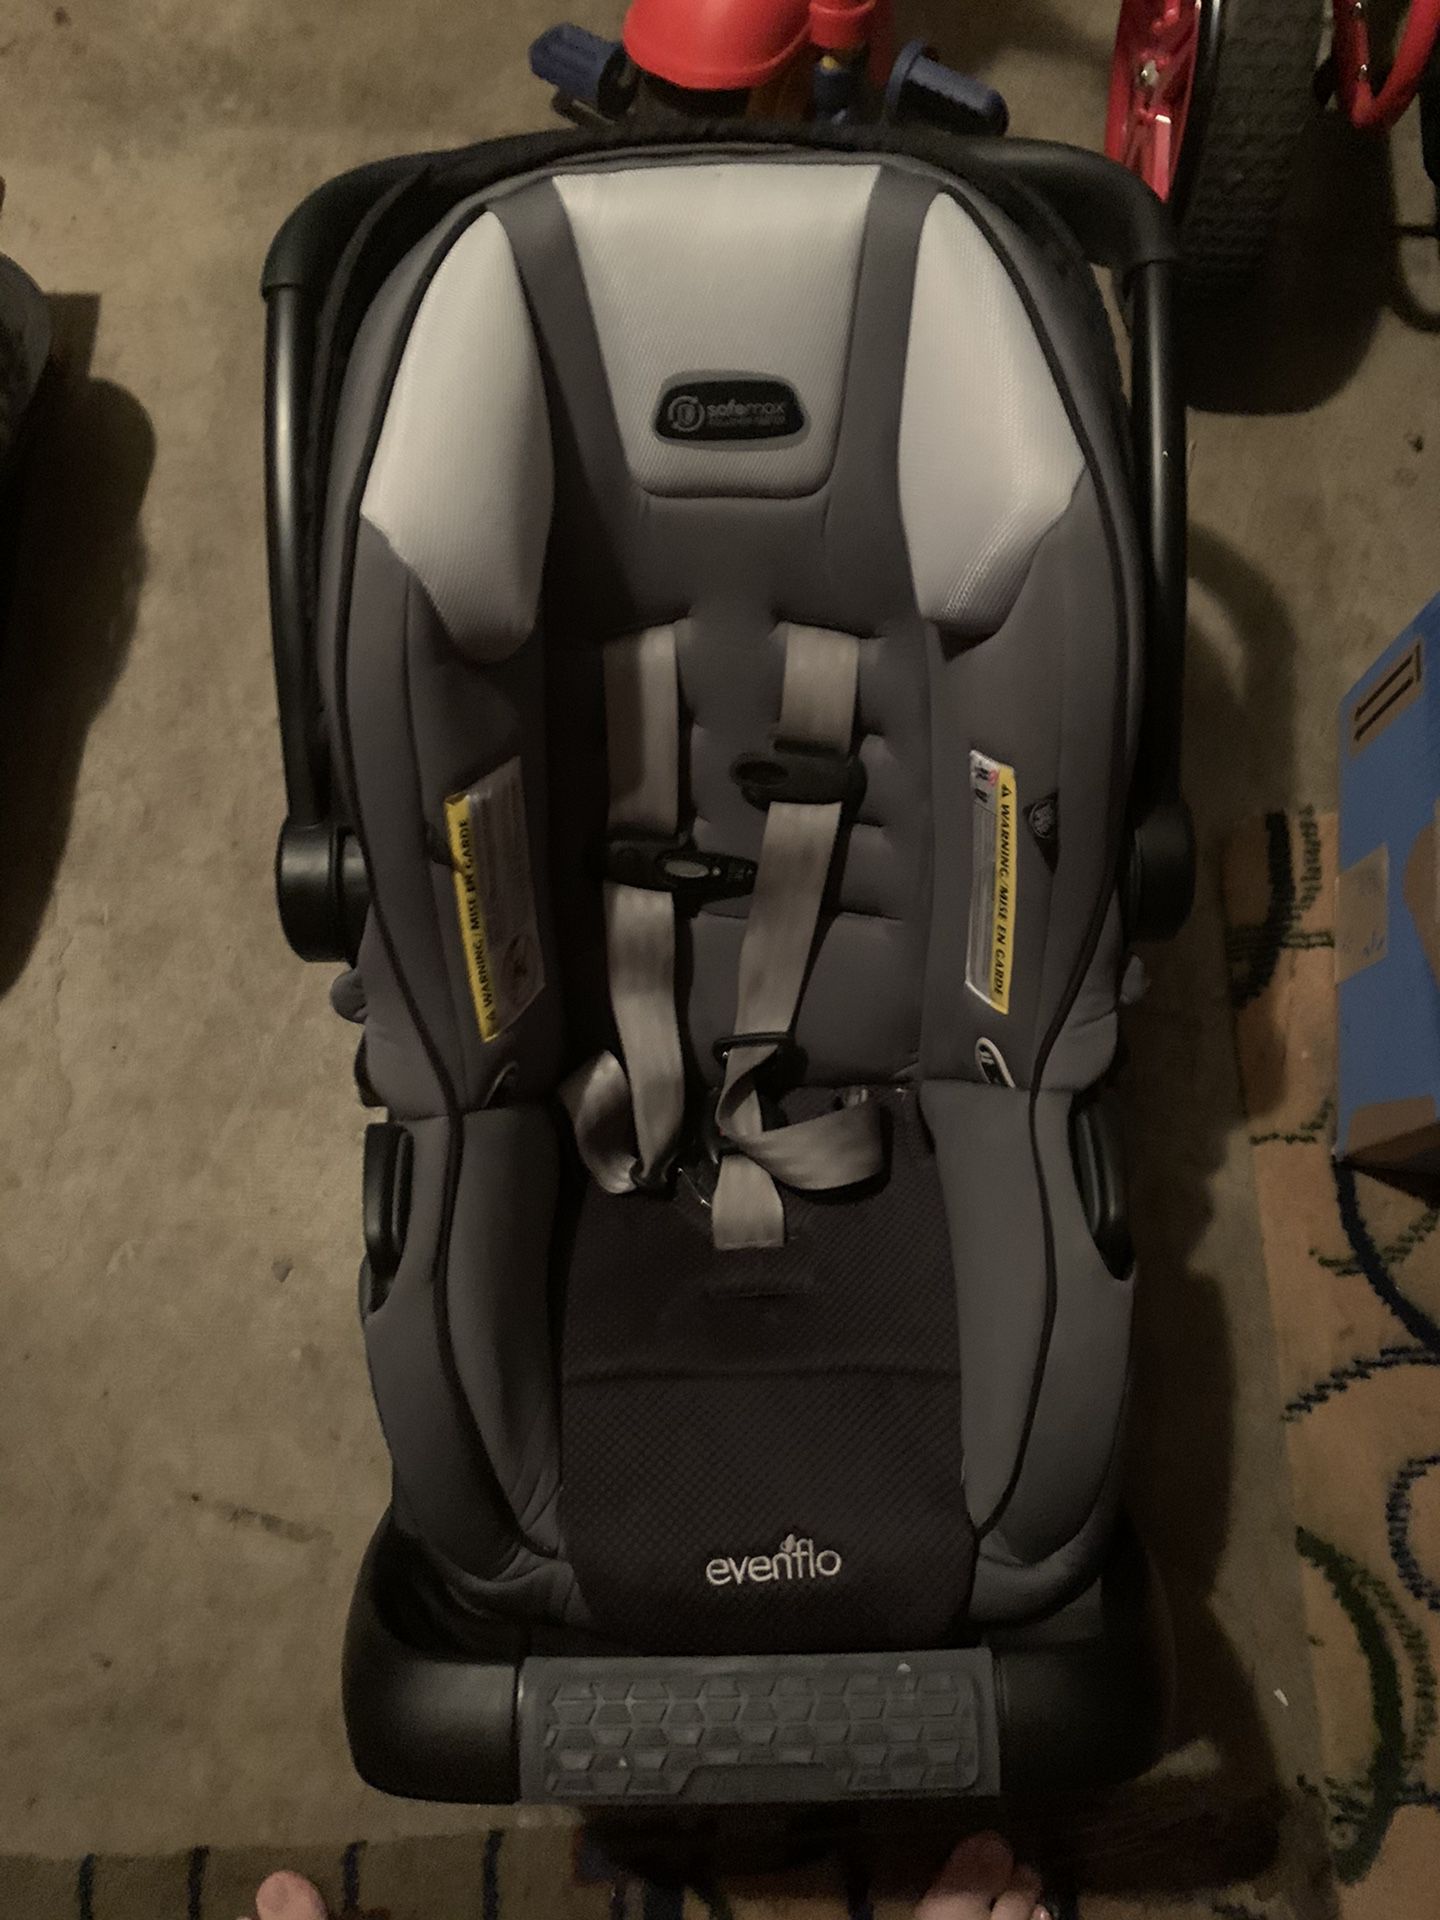 Evenflo Safemax infant car seat with a base.